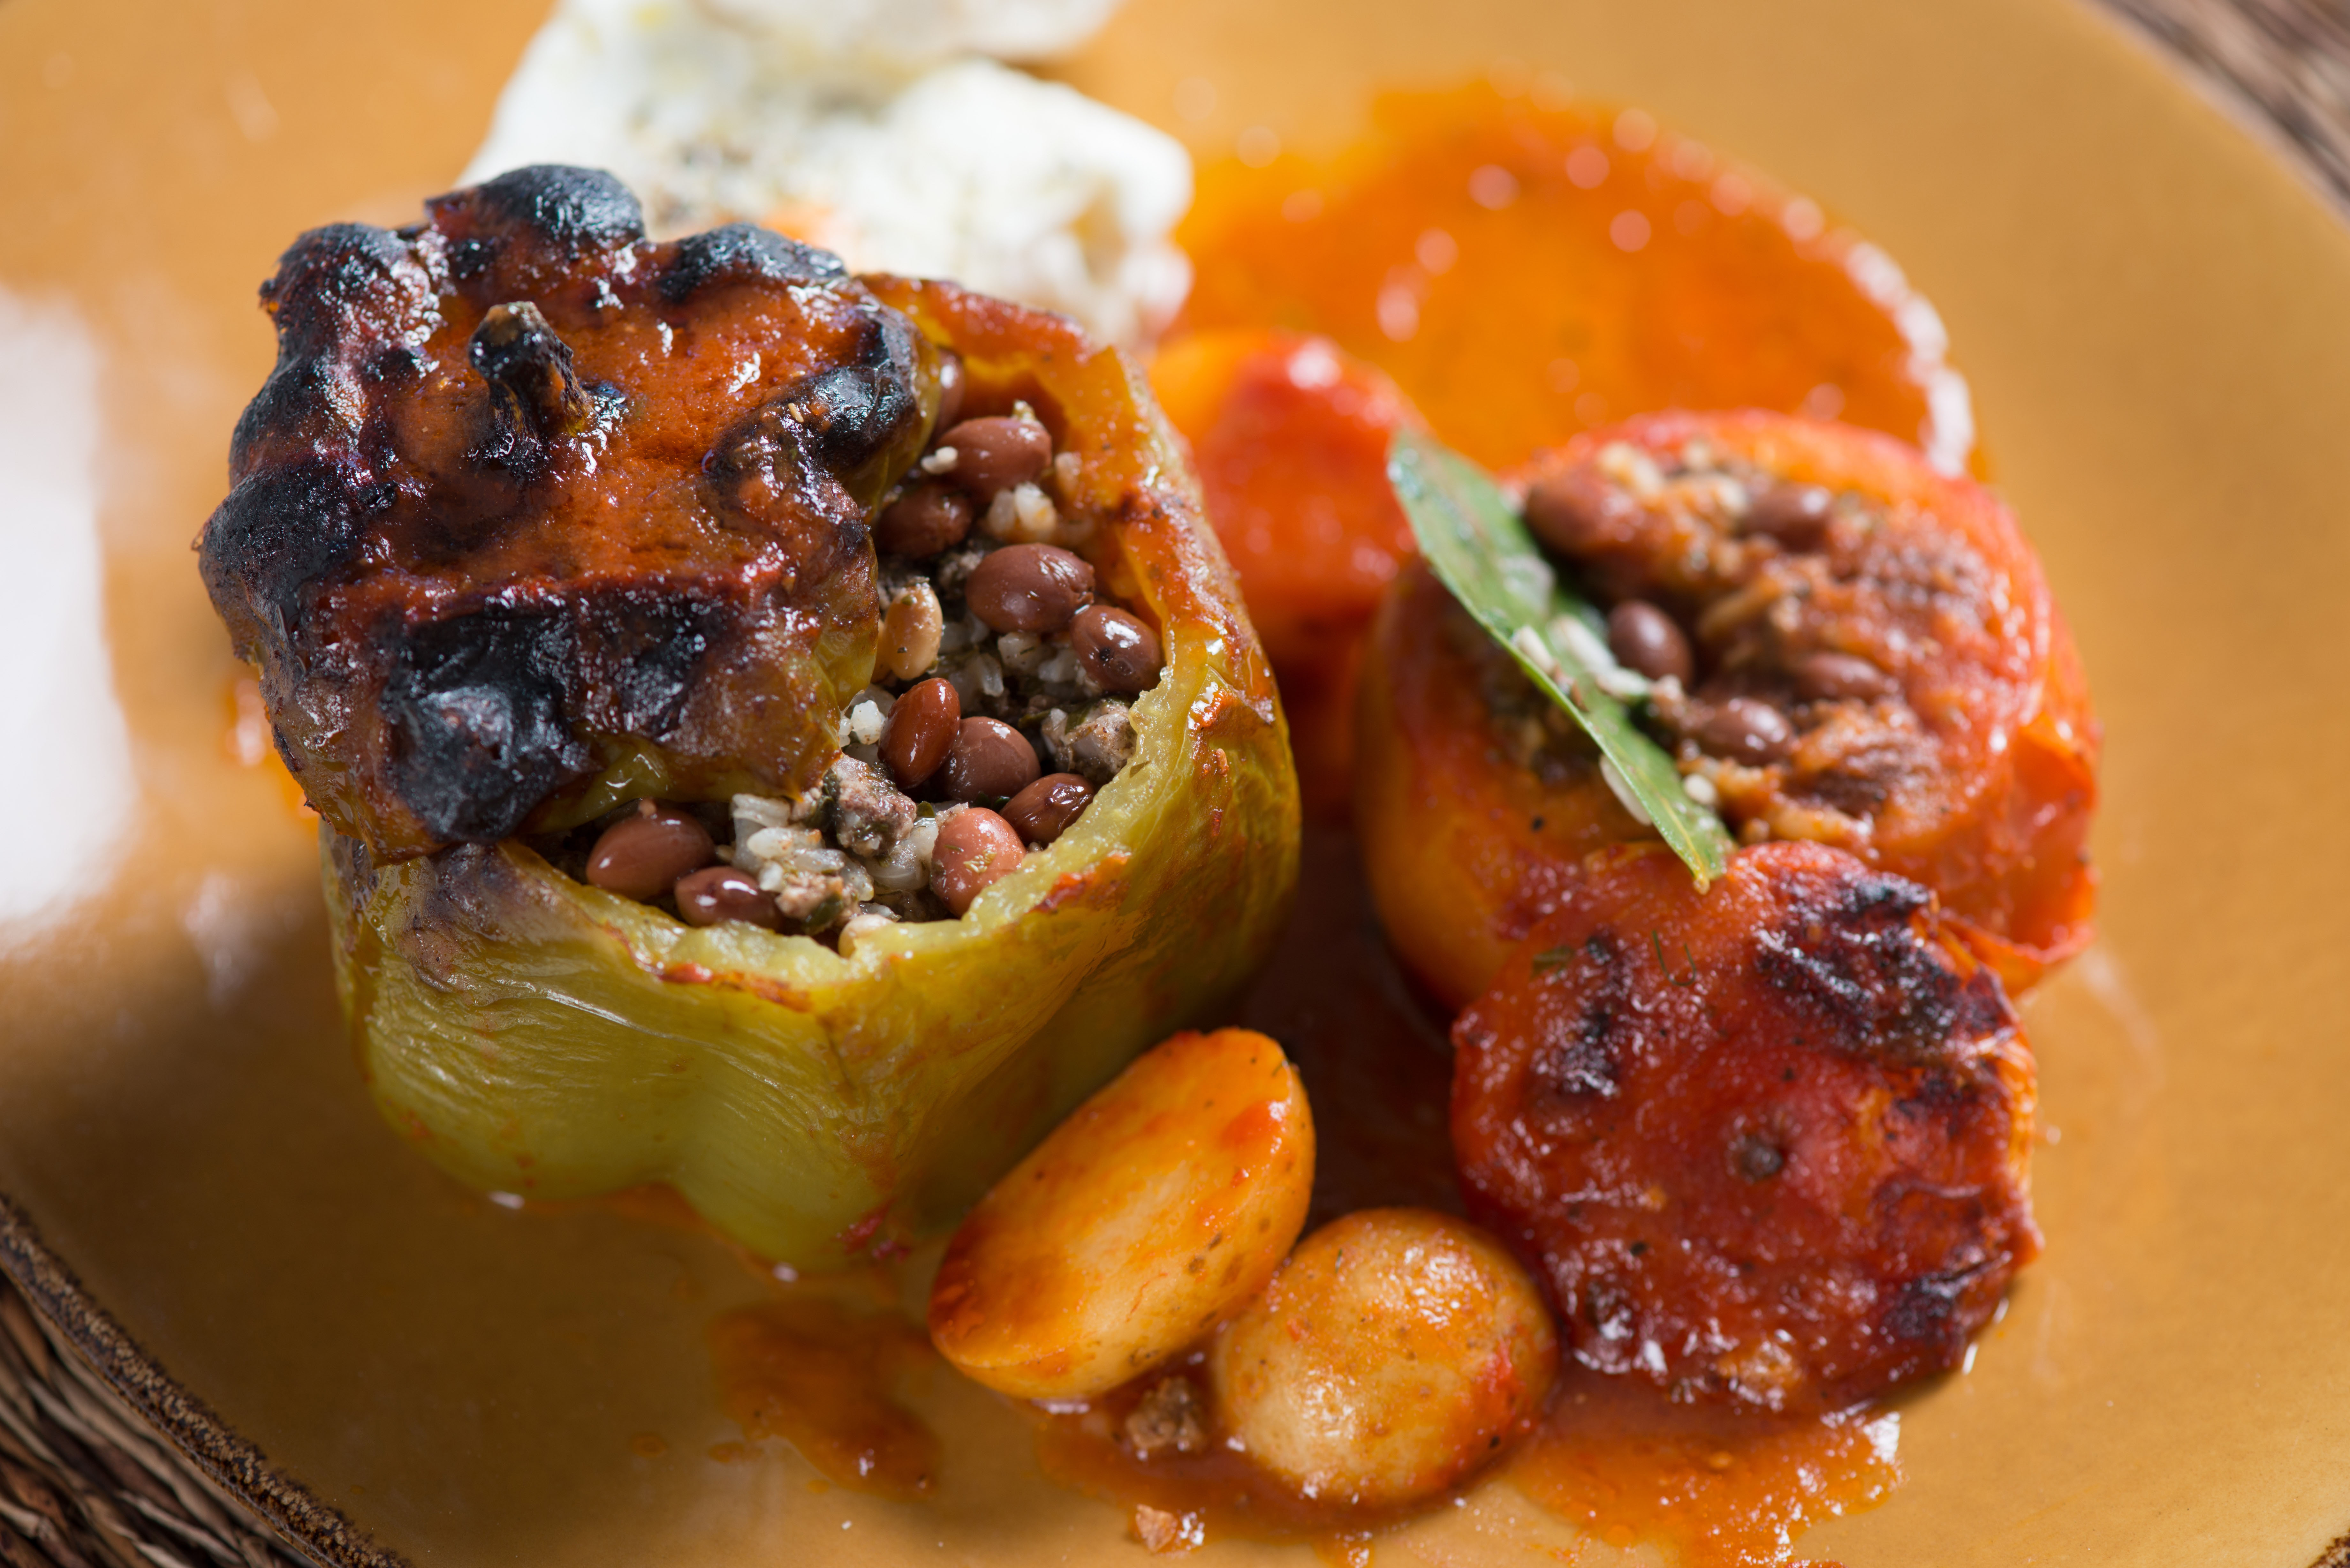 An example of the Greek stuffed vegetables with mint, dill, rice, and red beans recipe.